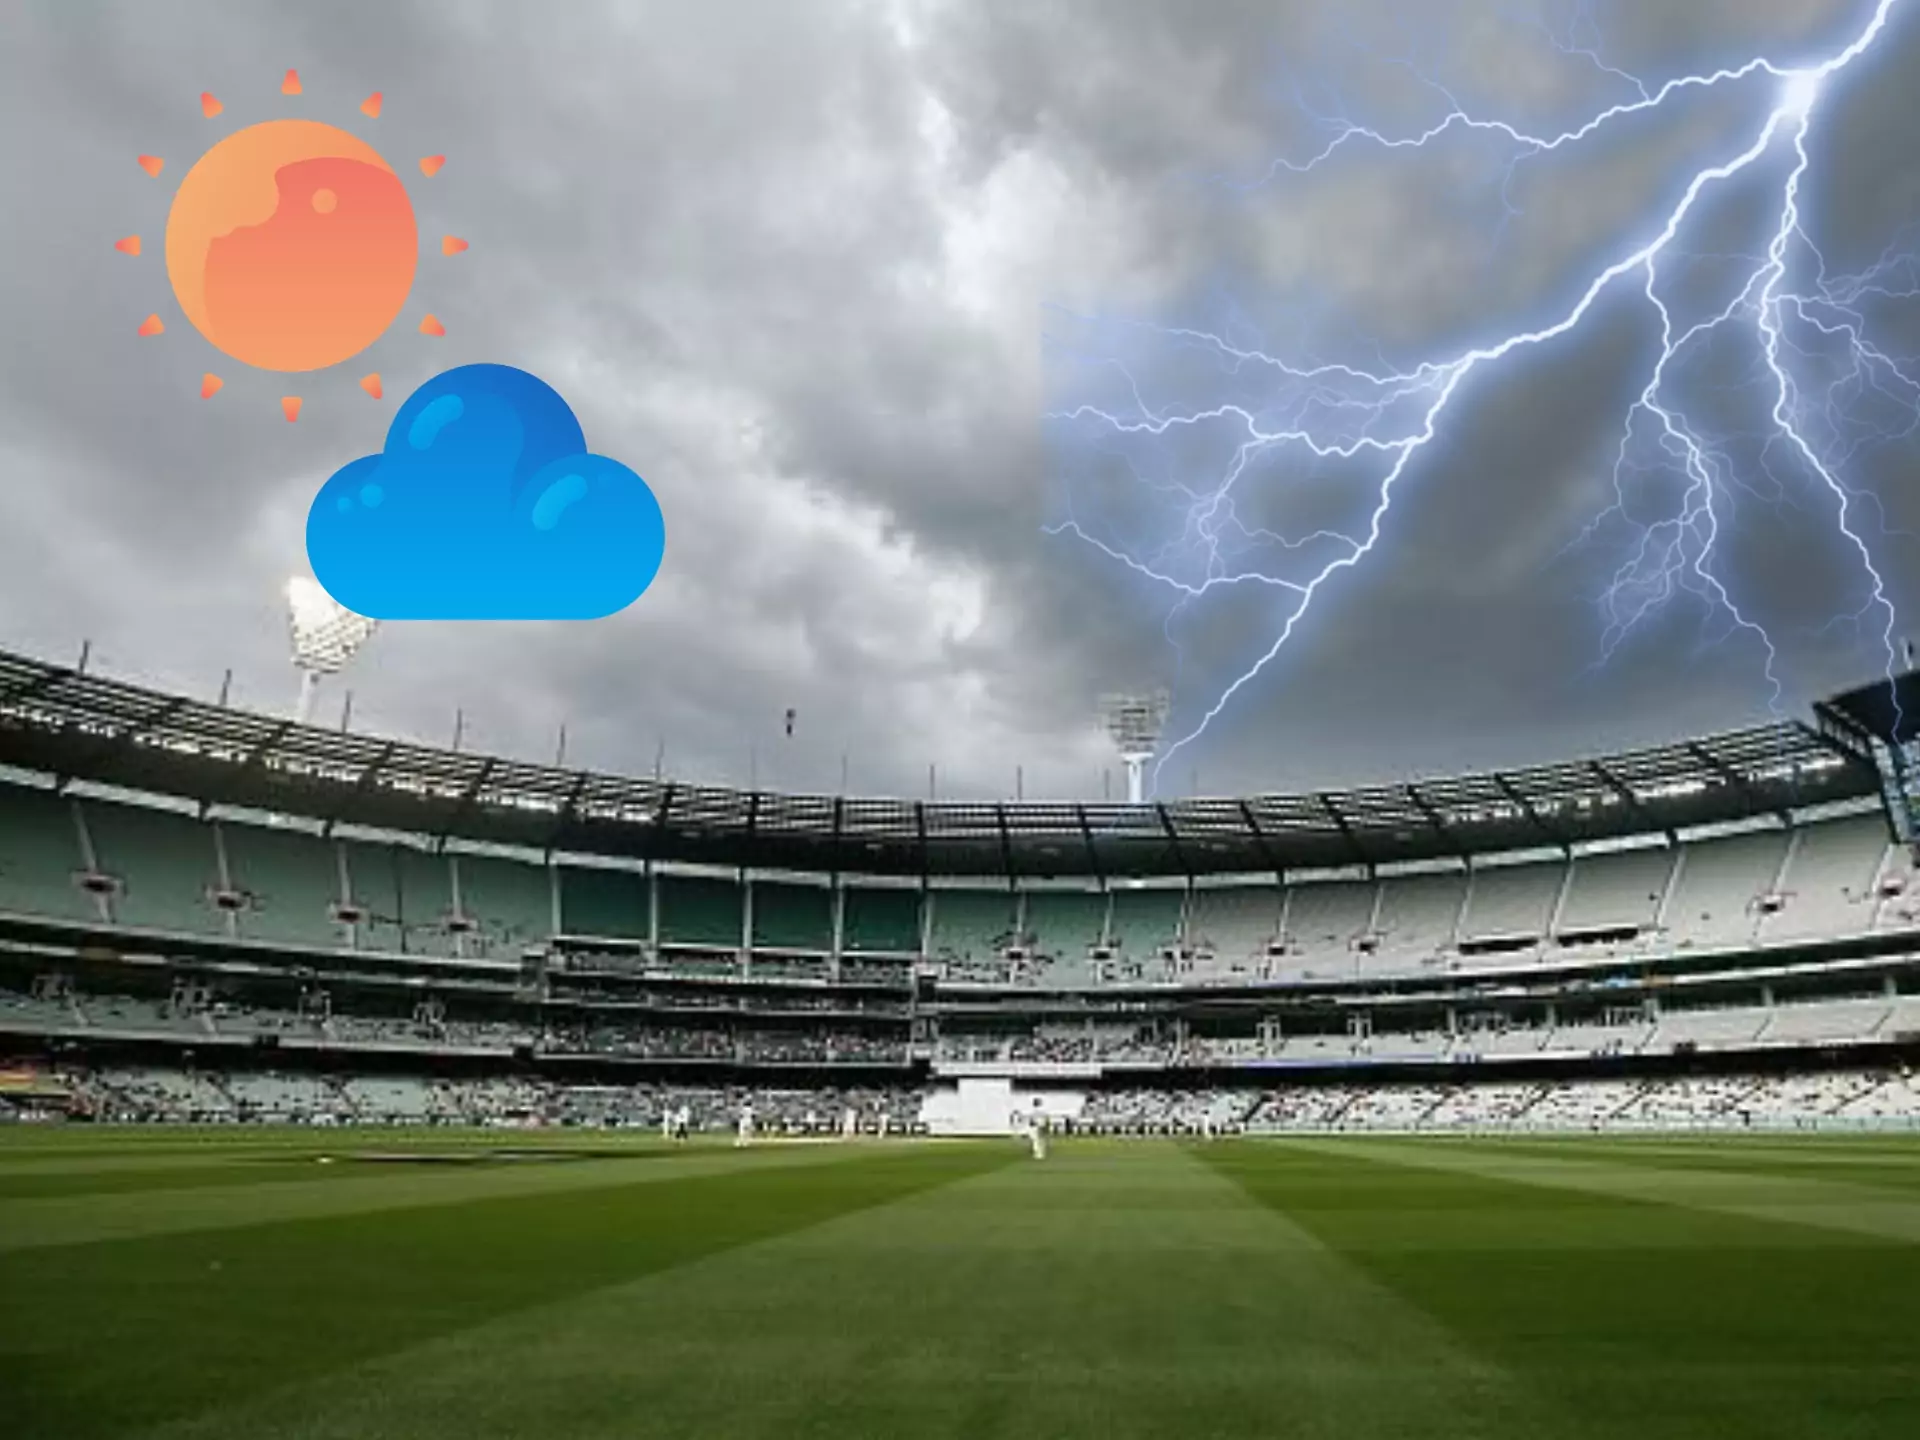 Remember, that weather changes can change a cricket game's results.